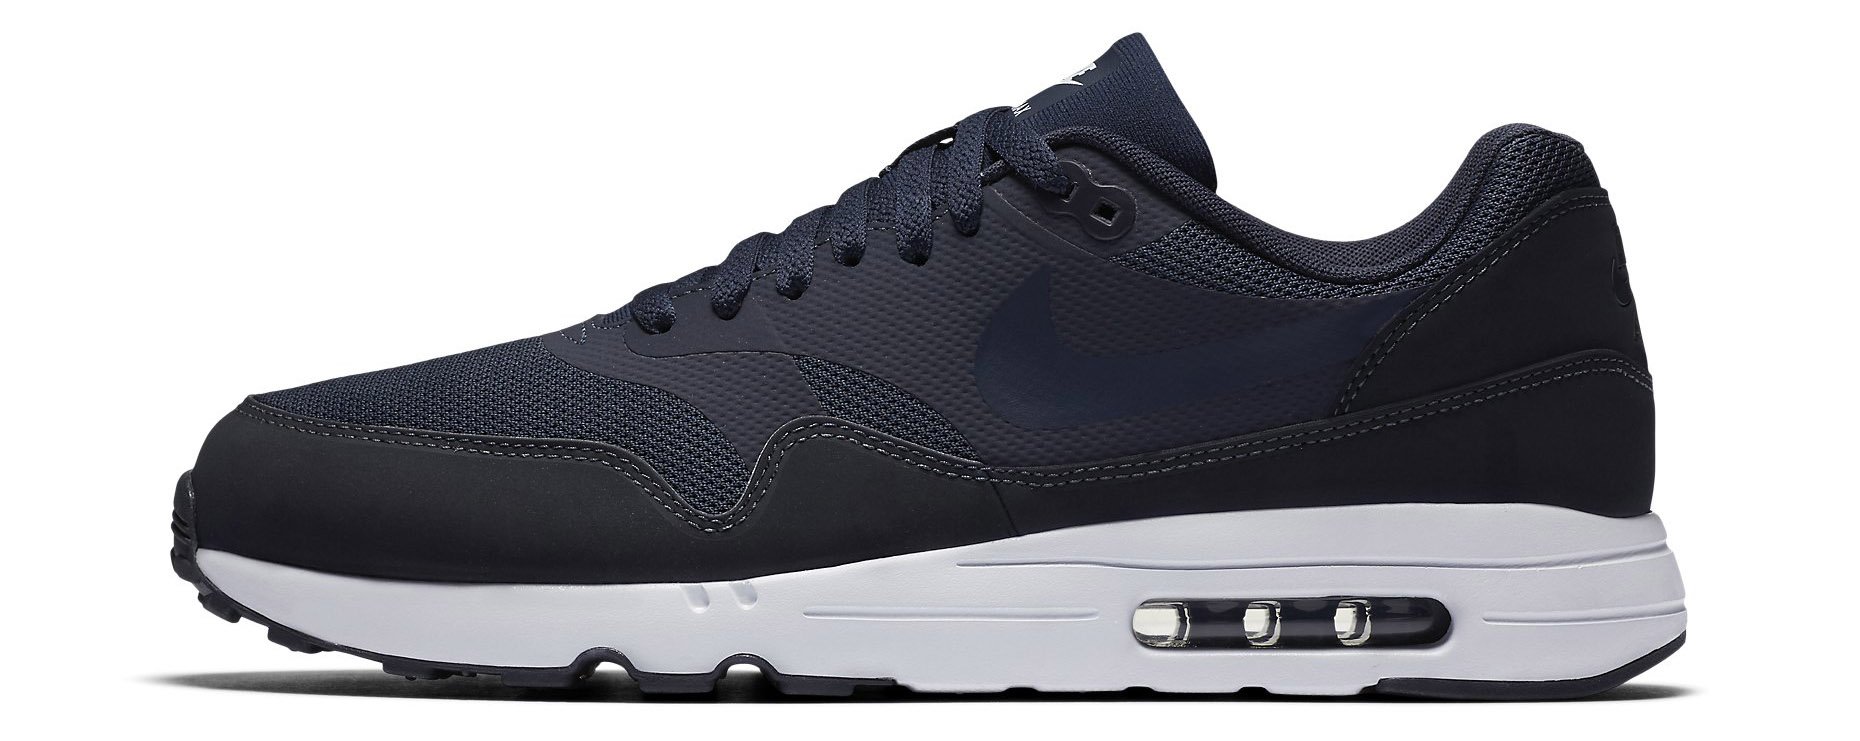 Rand Zuigeling trompet Shoes Nike AIR MAX 1 ULTRA 2.0 ESSENTIAL - Top4Football.com